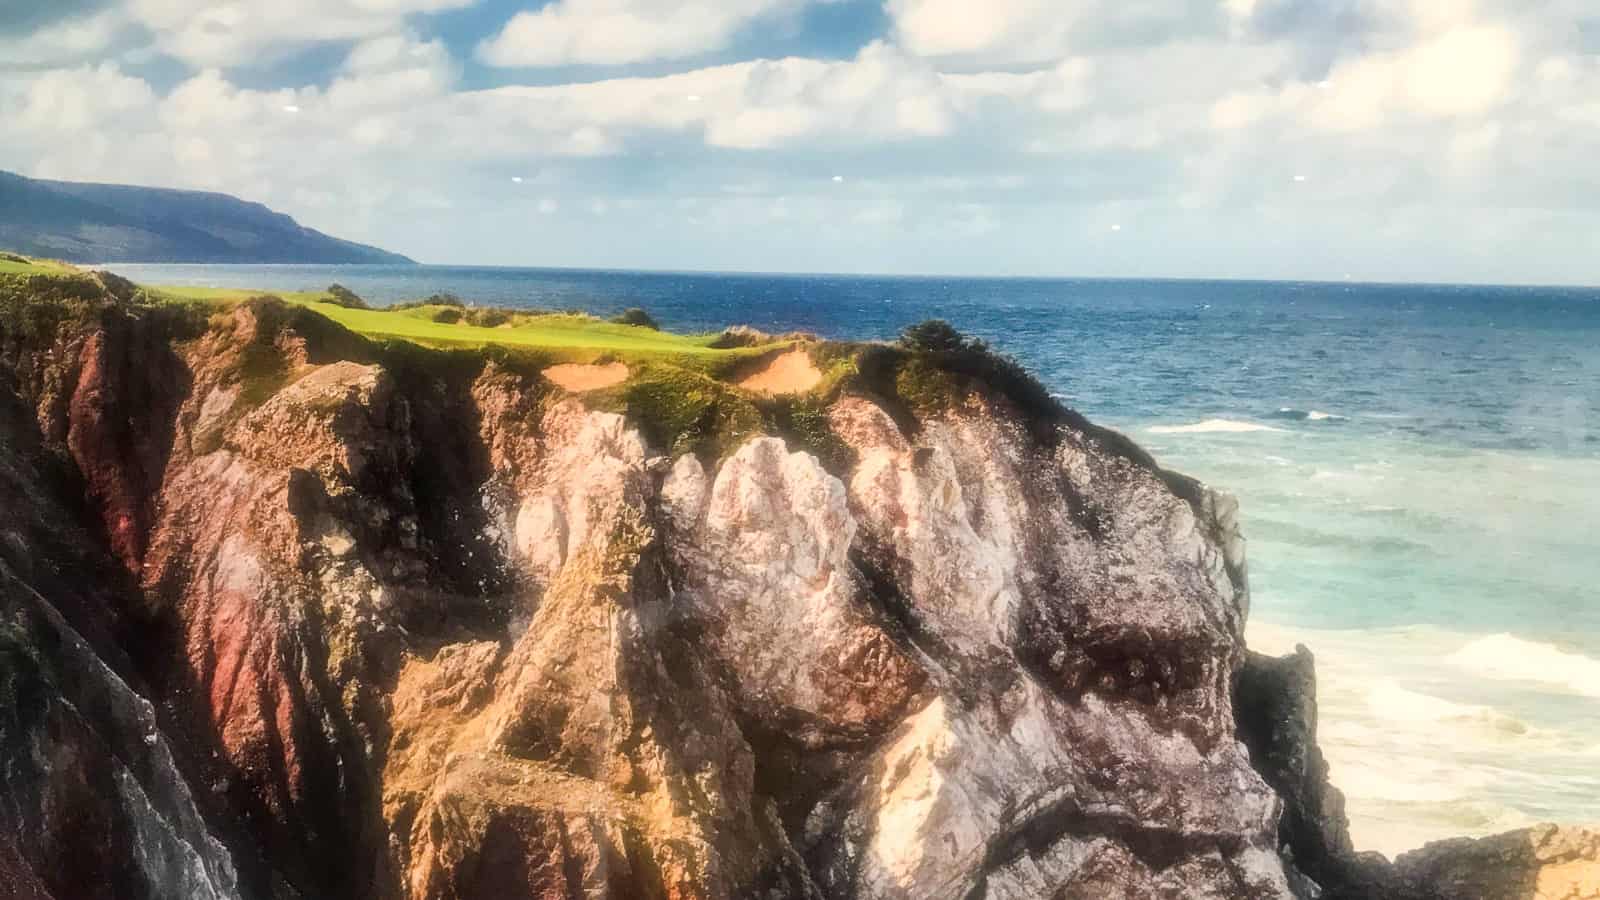 Cabot Cliffs - summer travel guide to Cape Breton